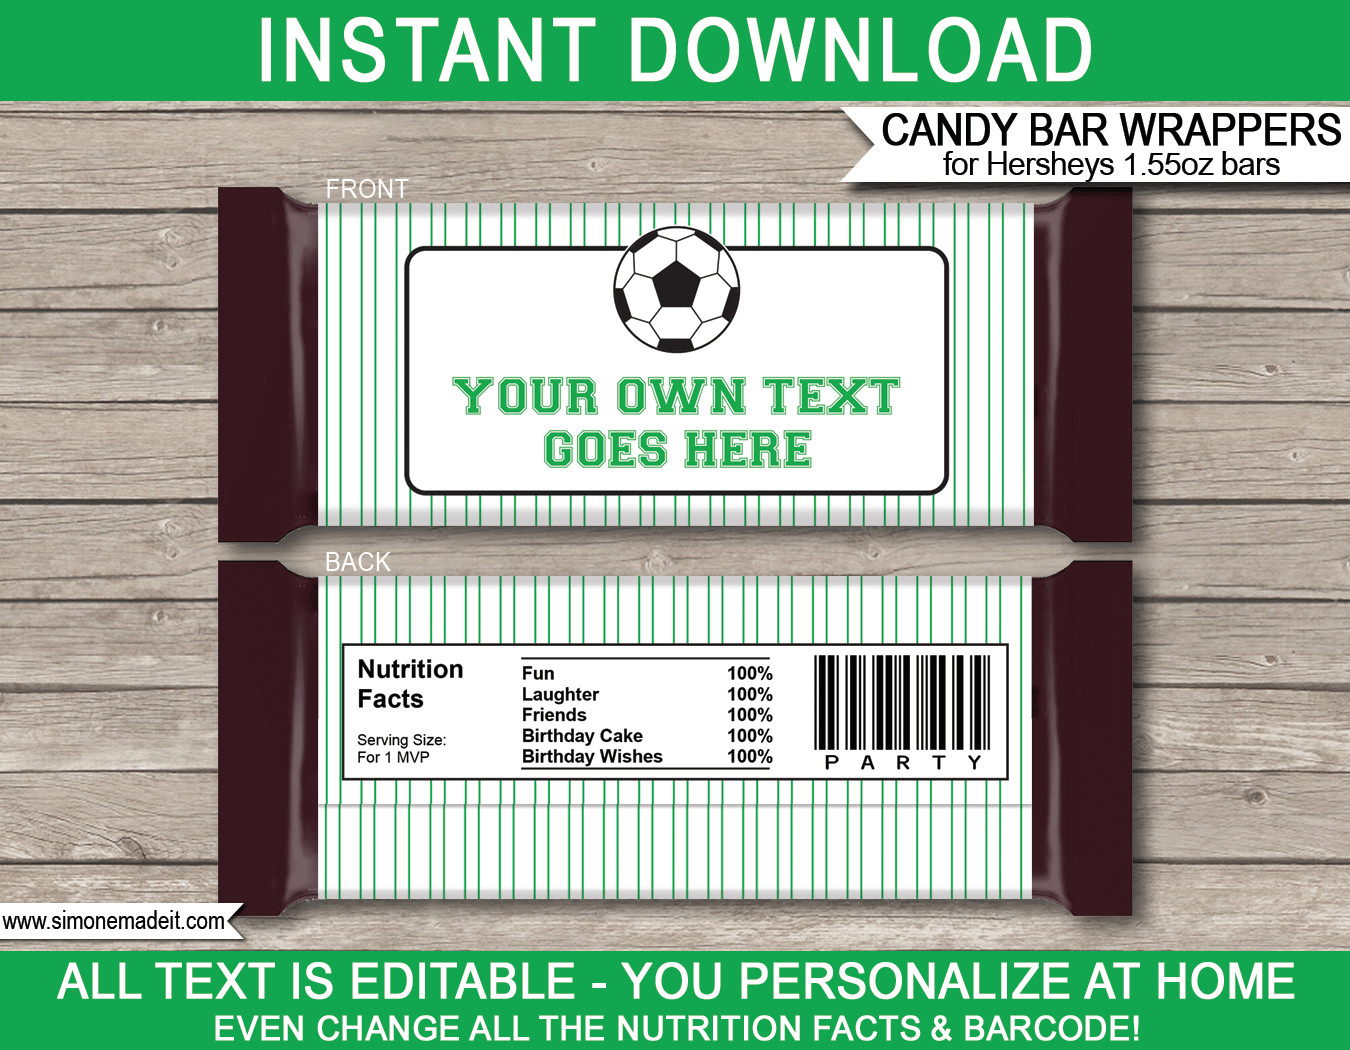 Hershey Candy Bar Wrapper Template soccer Hershey Candy Bar Wrappers